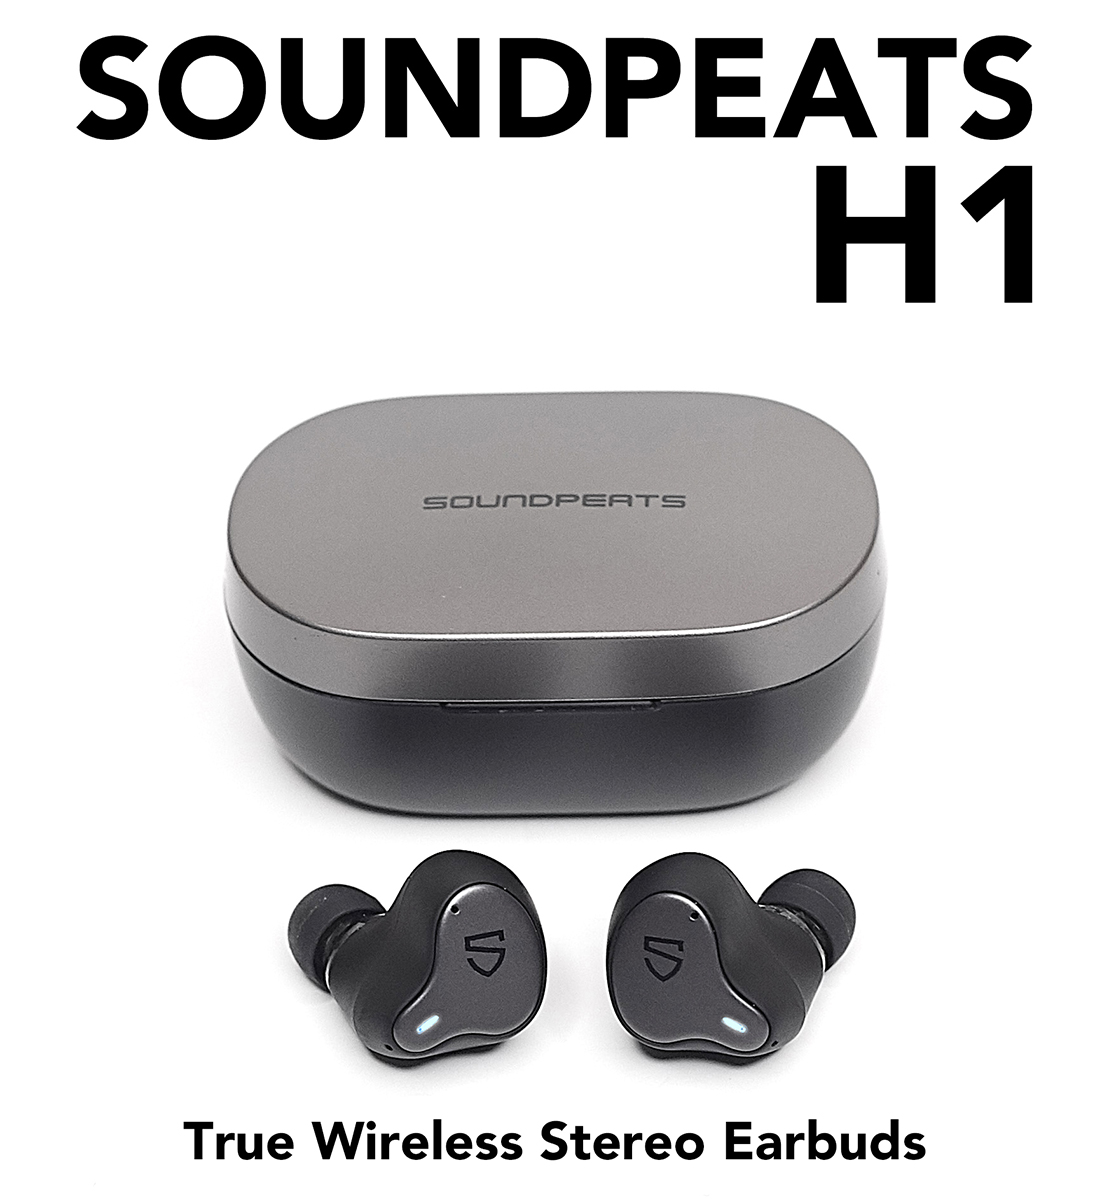 Soundpeats H1 True Wireless Stereo Earbuds review - The Gadgeteer